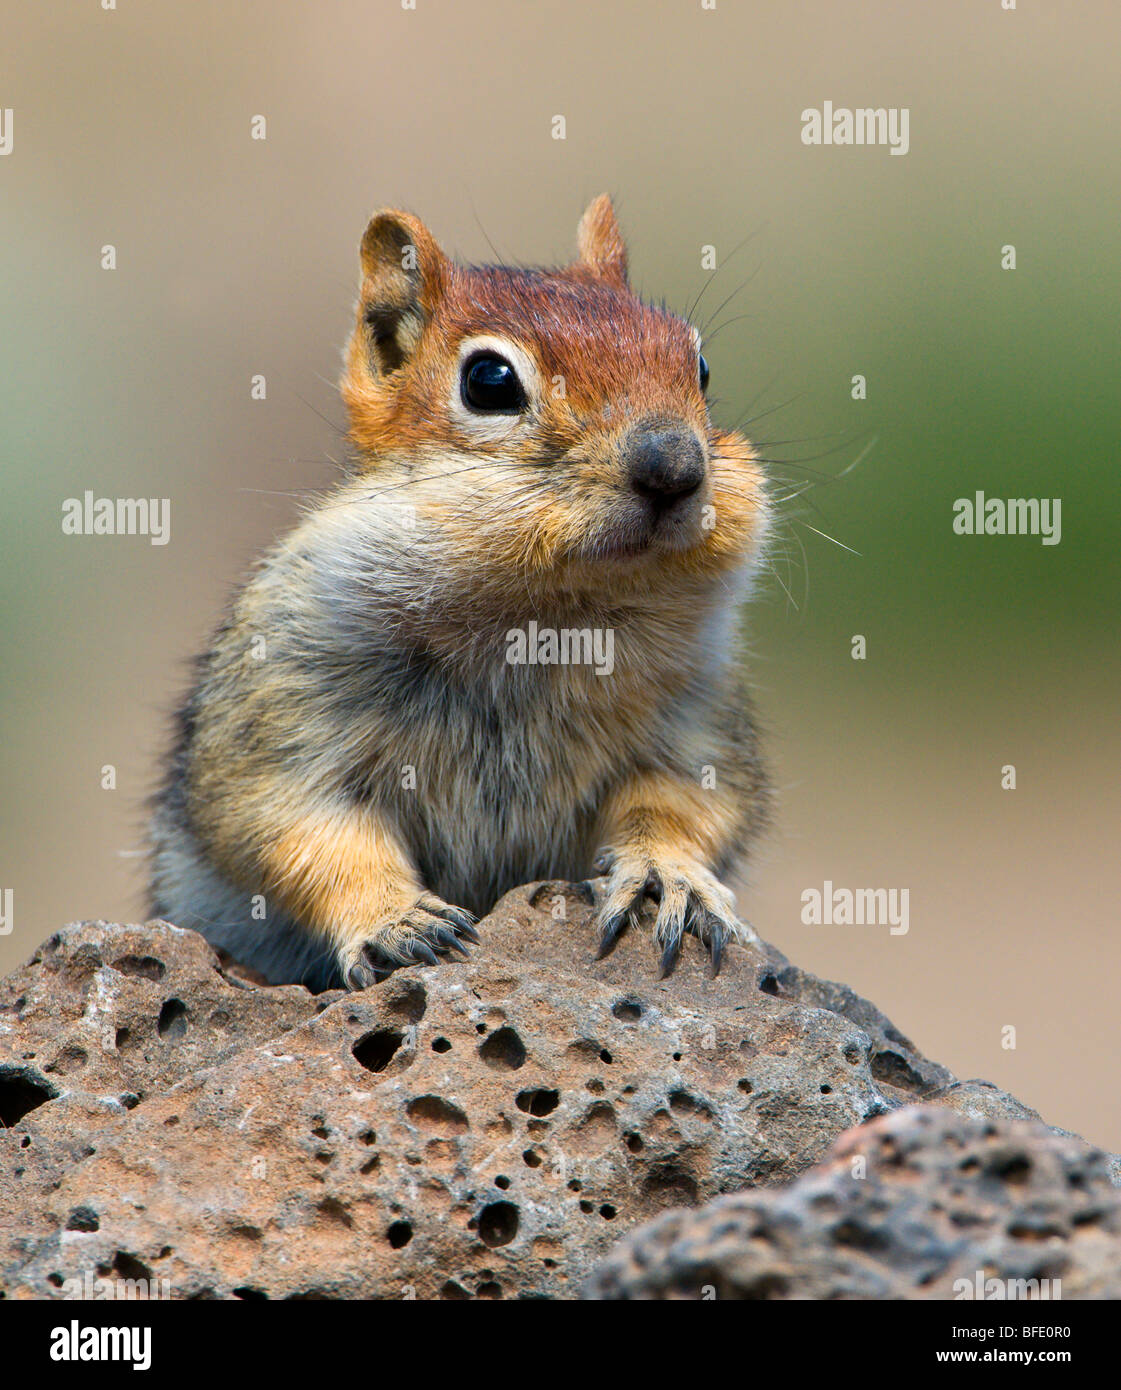 Golden-mantled ground squirrel (Spermophilus lateralis) at Deschutes National Forest, Oregon, USA Stock Photo